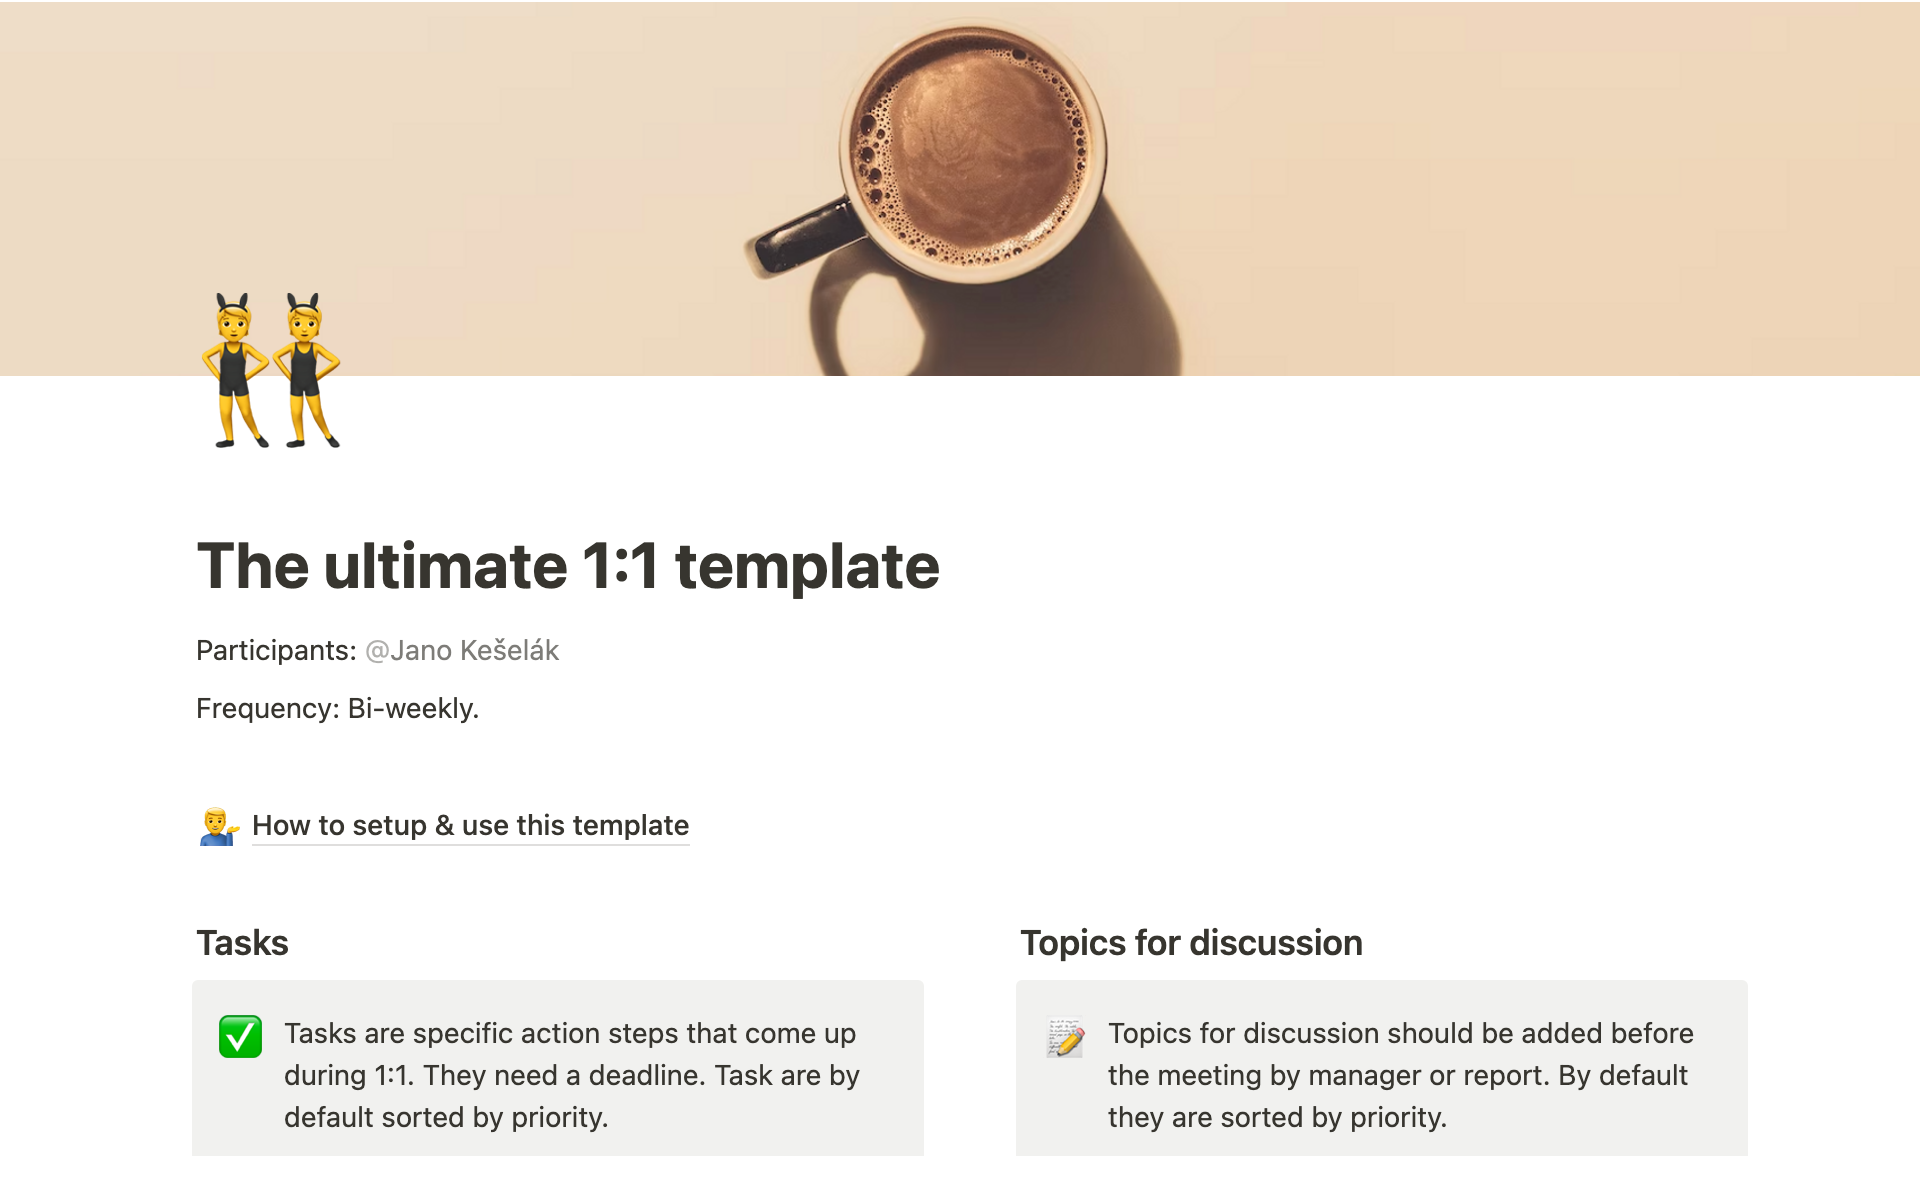 This template brings structure to your 1:1s by allowing you to collect topics before the meeting, track tasks and keep an eye on the long term goals of people in your team.